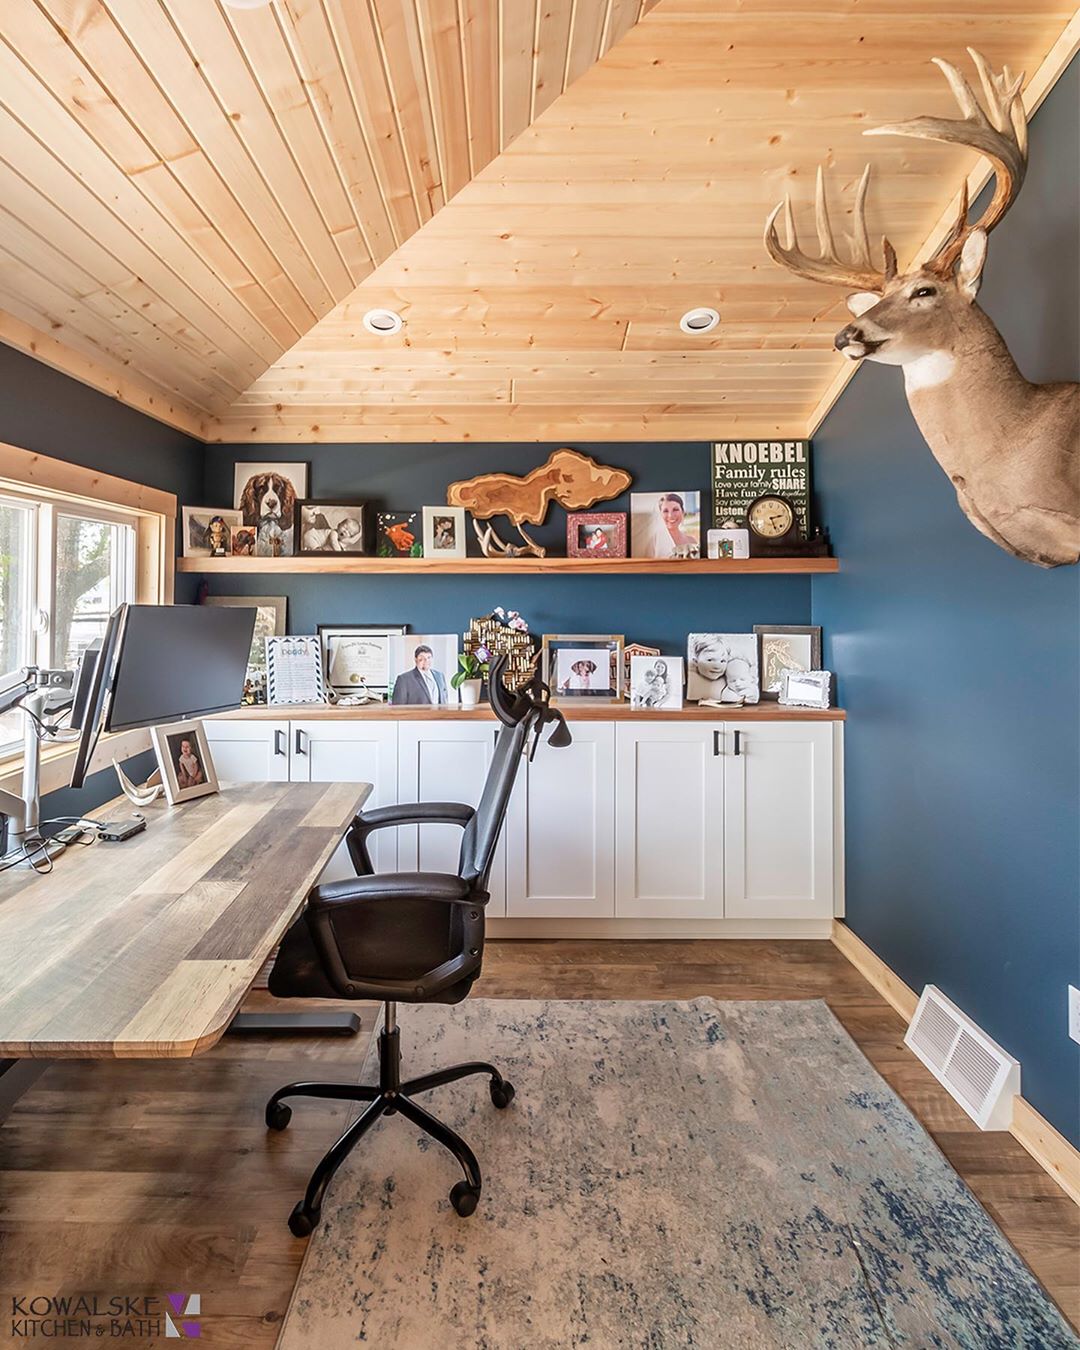 Classic Home Office with Large Reclaimed Wood Desk and Deer Head on the Wall. Photo by Instagram user @kowalskekitchenandbath